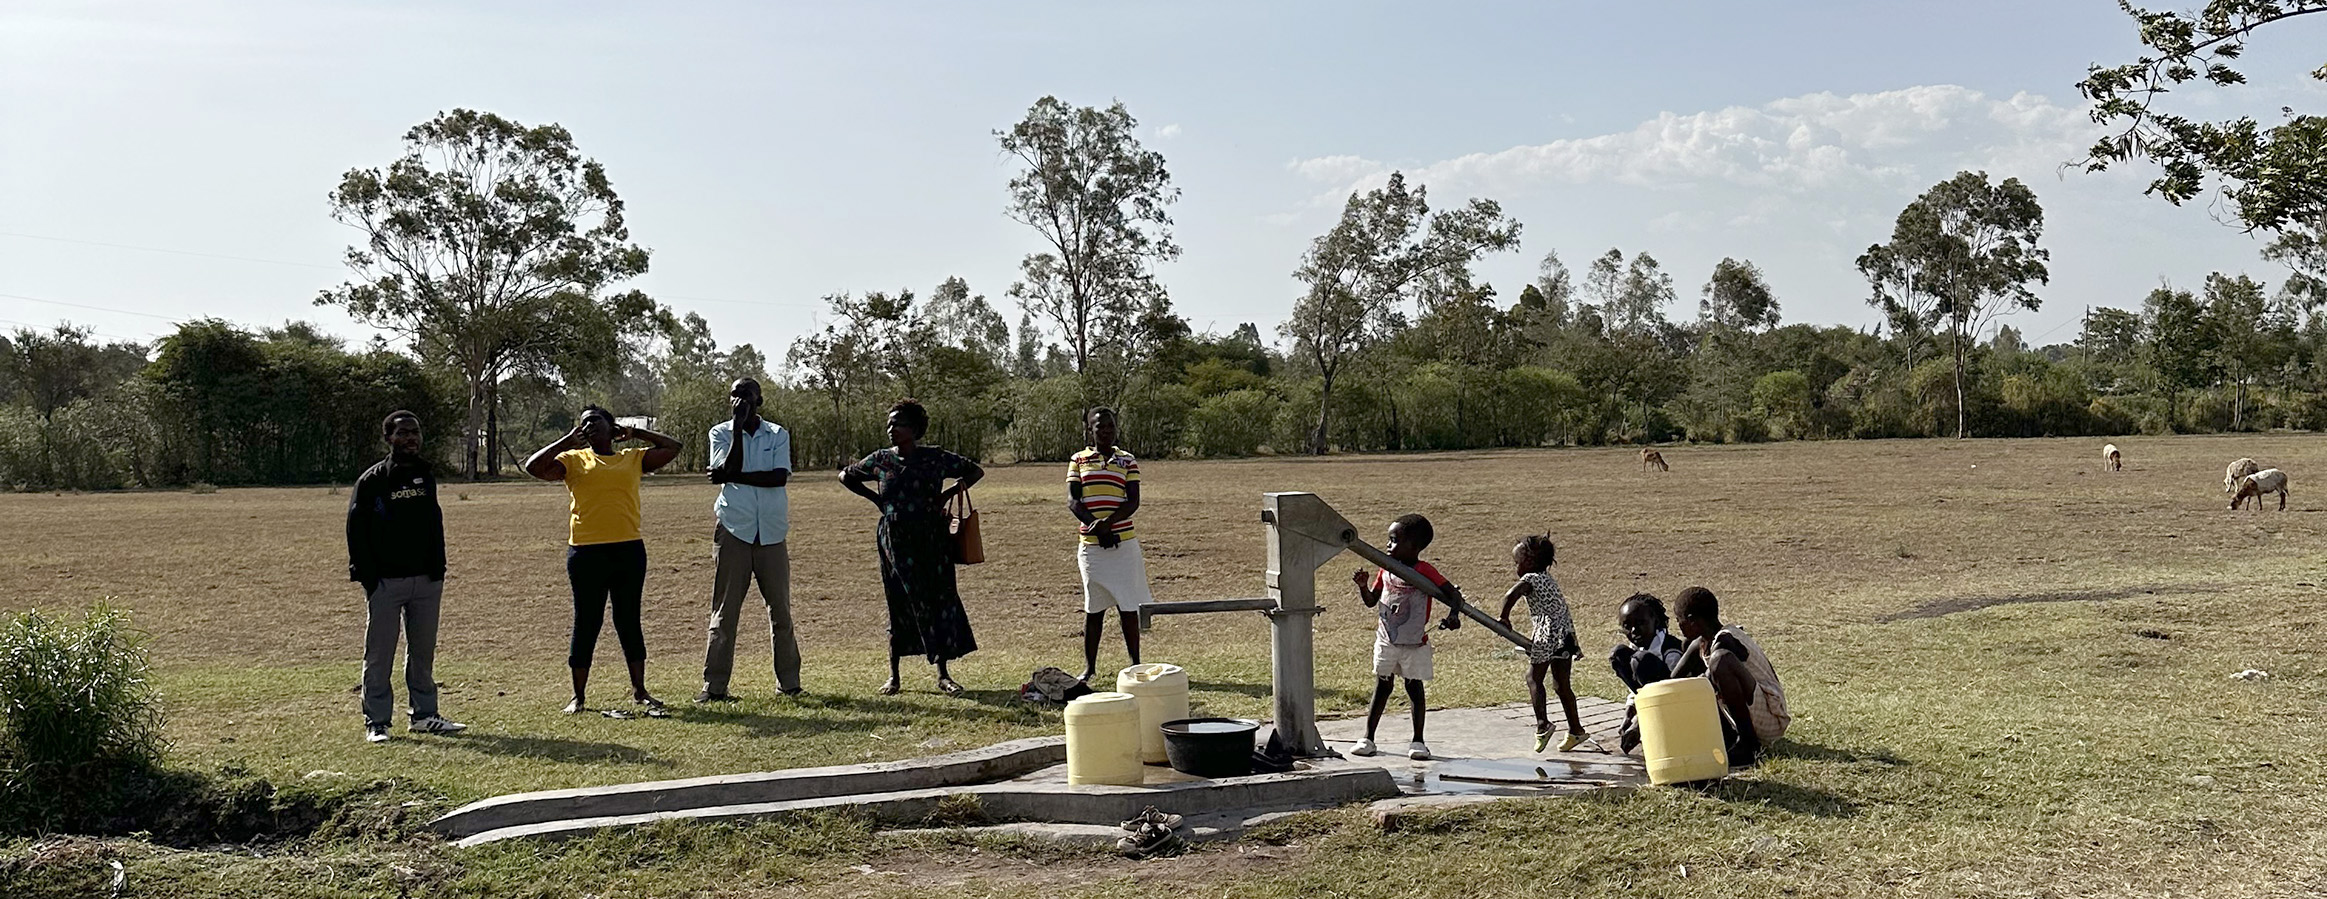 Teachers and a community board member with children gather around a WellBoring water pump in a rural African landscape.